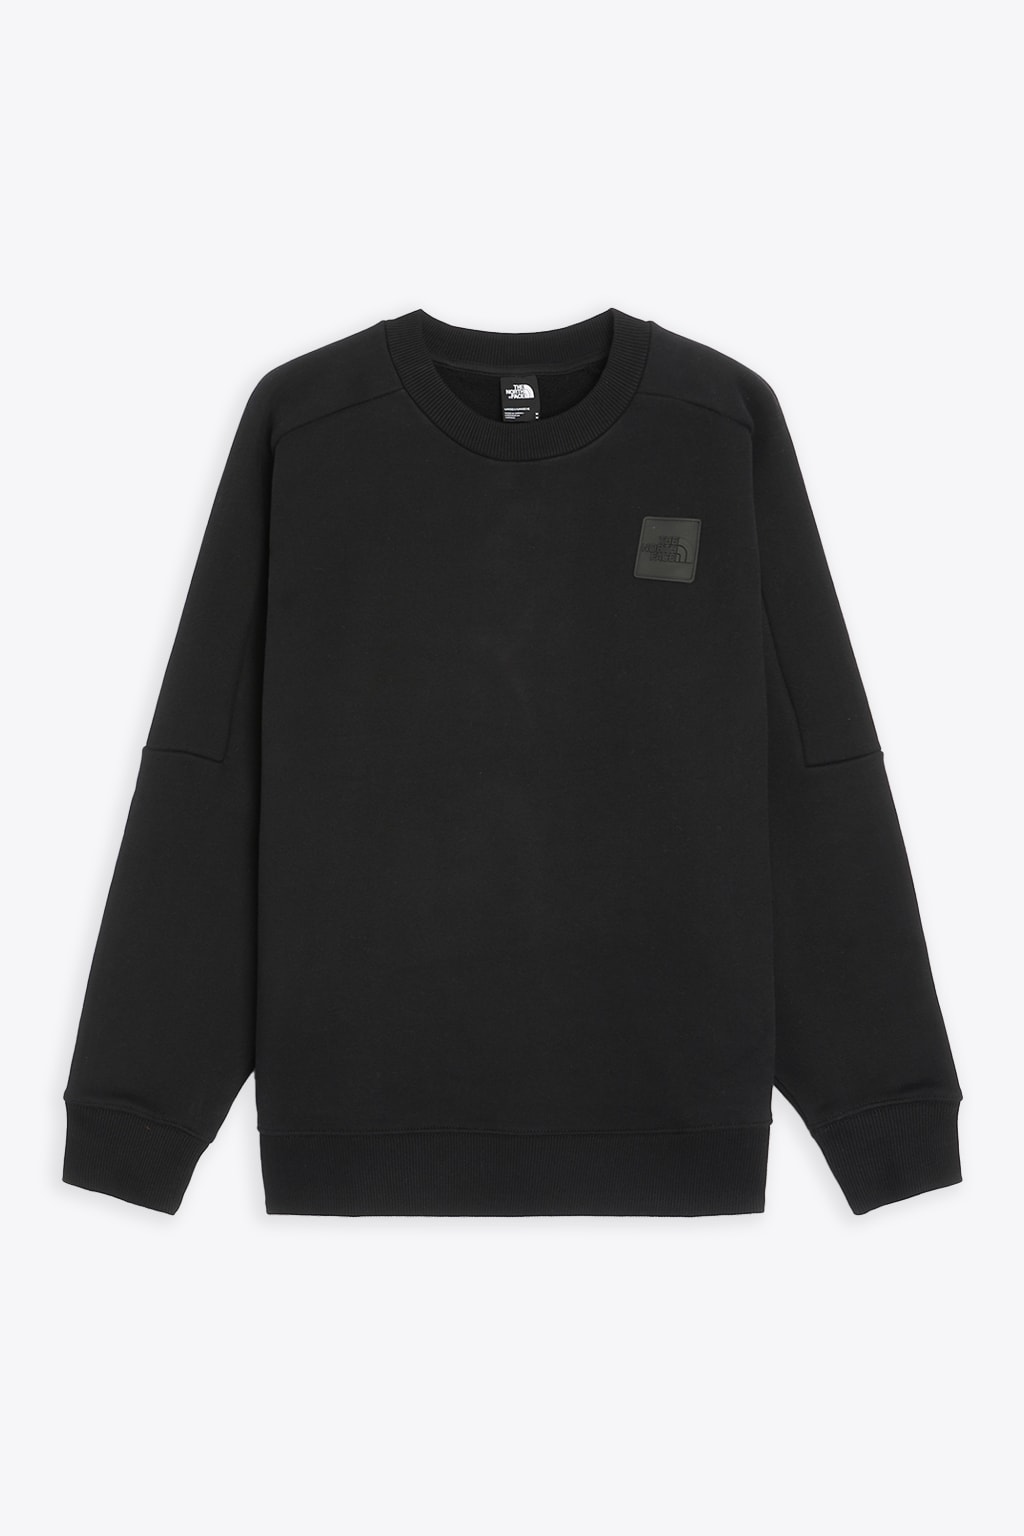 THE NORTH FACE UNISEX THE 489 CREW BLACK COTTON SWEATSHIRT WITH CHEST LOGO - THE 489 CREW